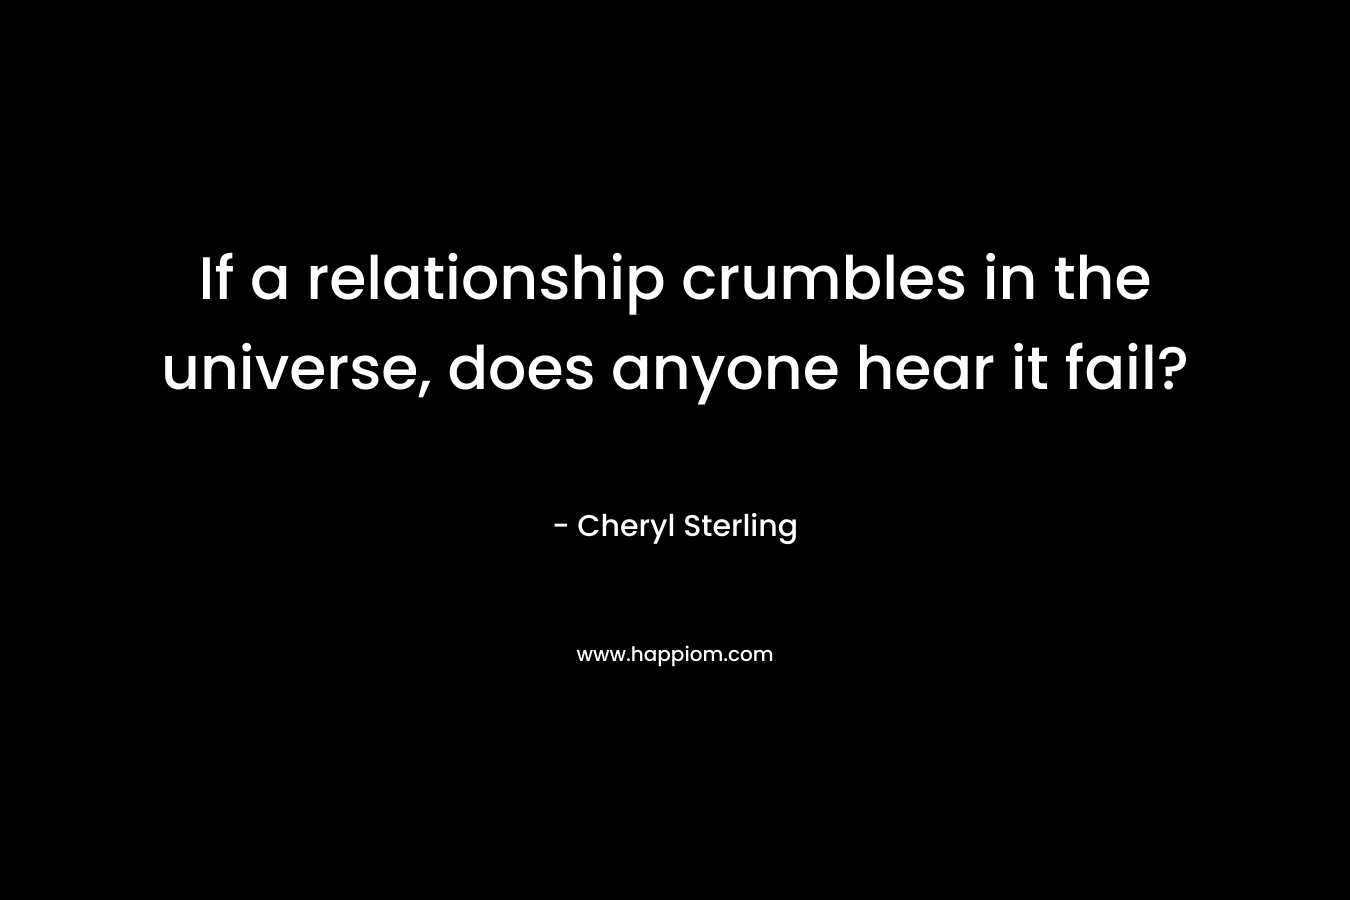 If a relationship crumbles in the universe, does anyone hear it fail?